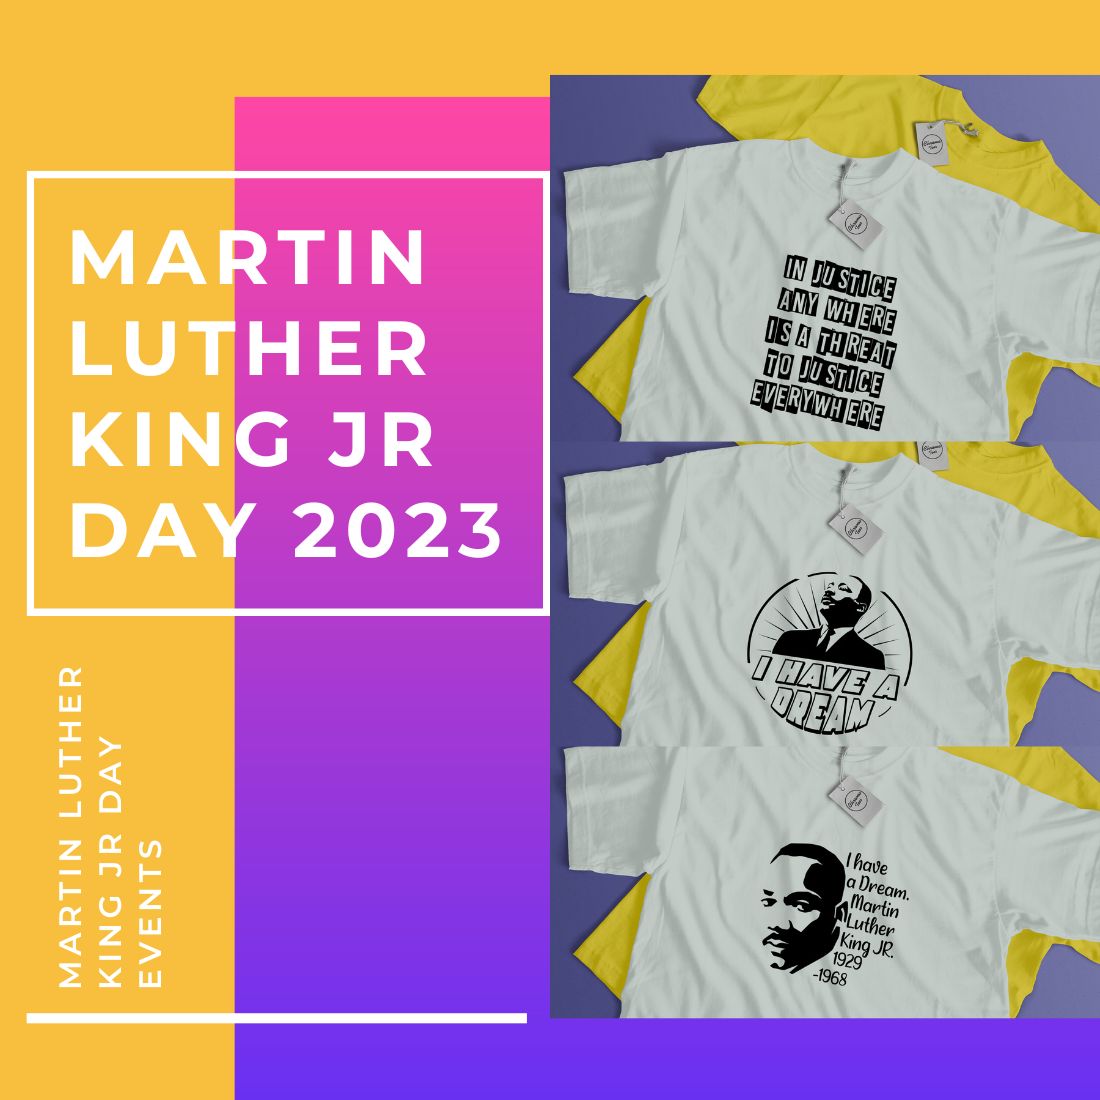 Martin Luther King National Holiday Day T-Shirt Design cover image.